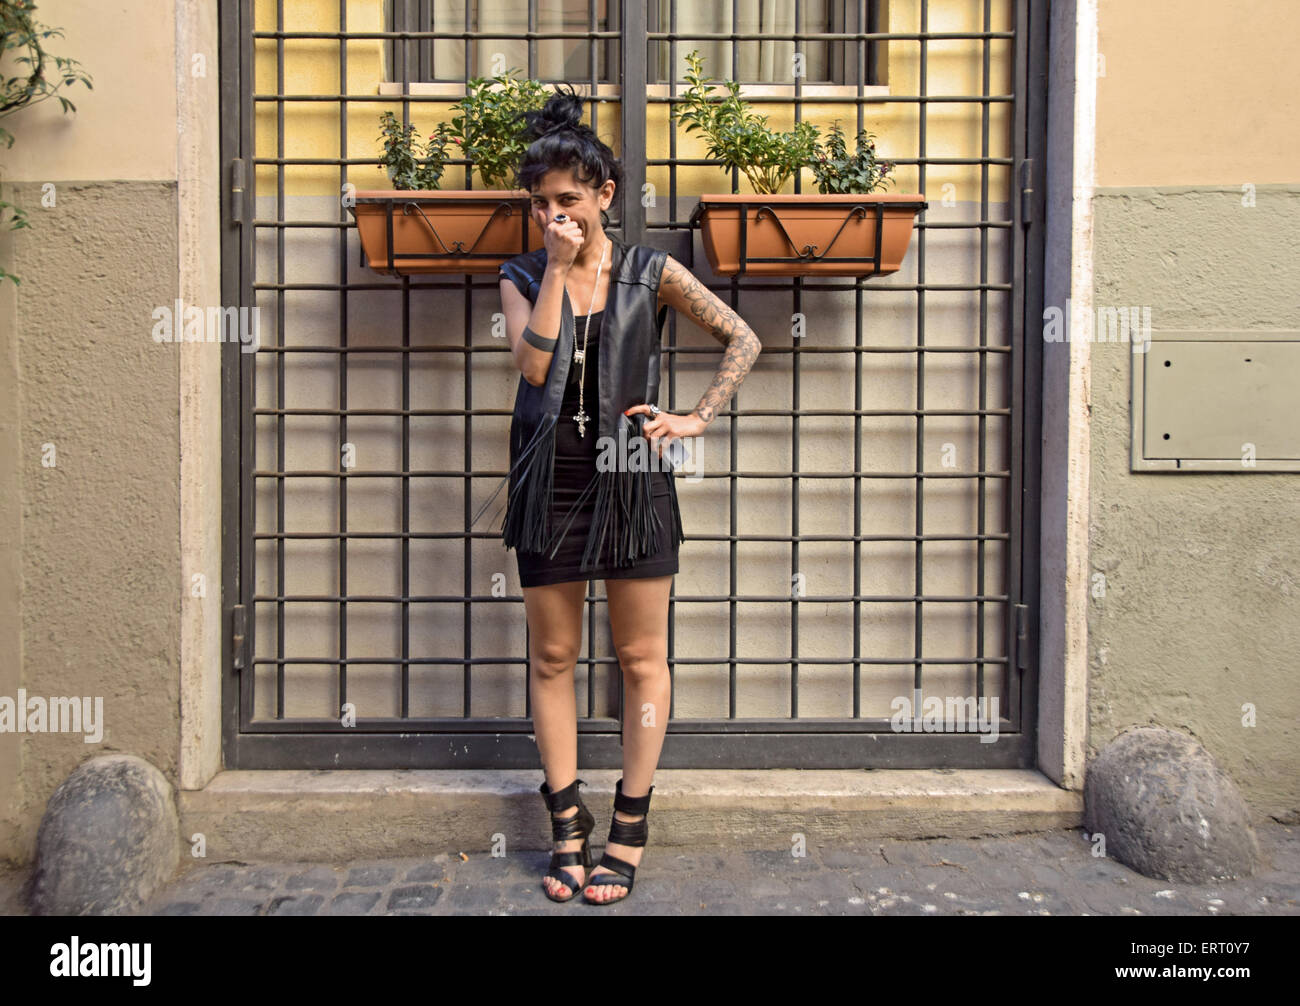 Posed portrait of an Italian beautician with tattoos in Rome, Italy Stock Photo